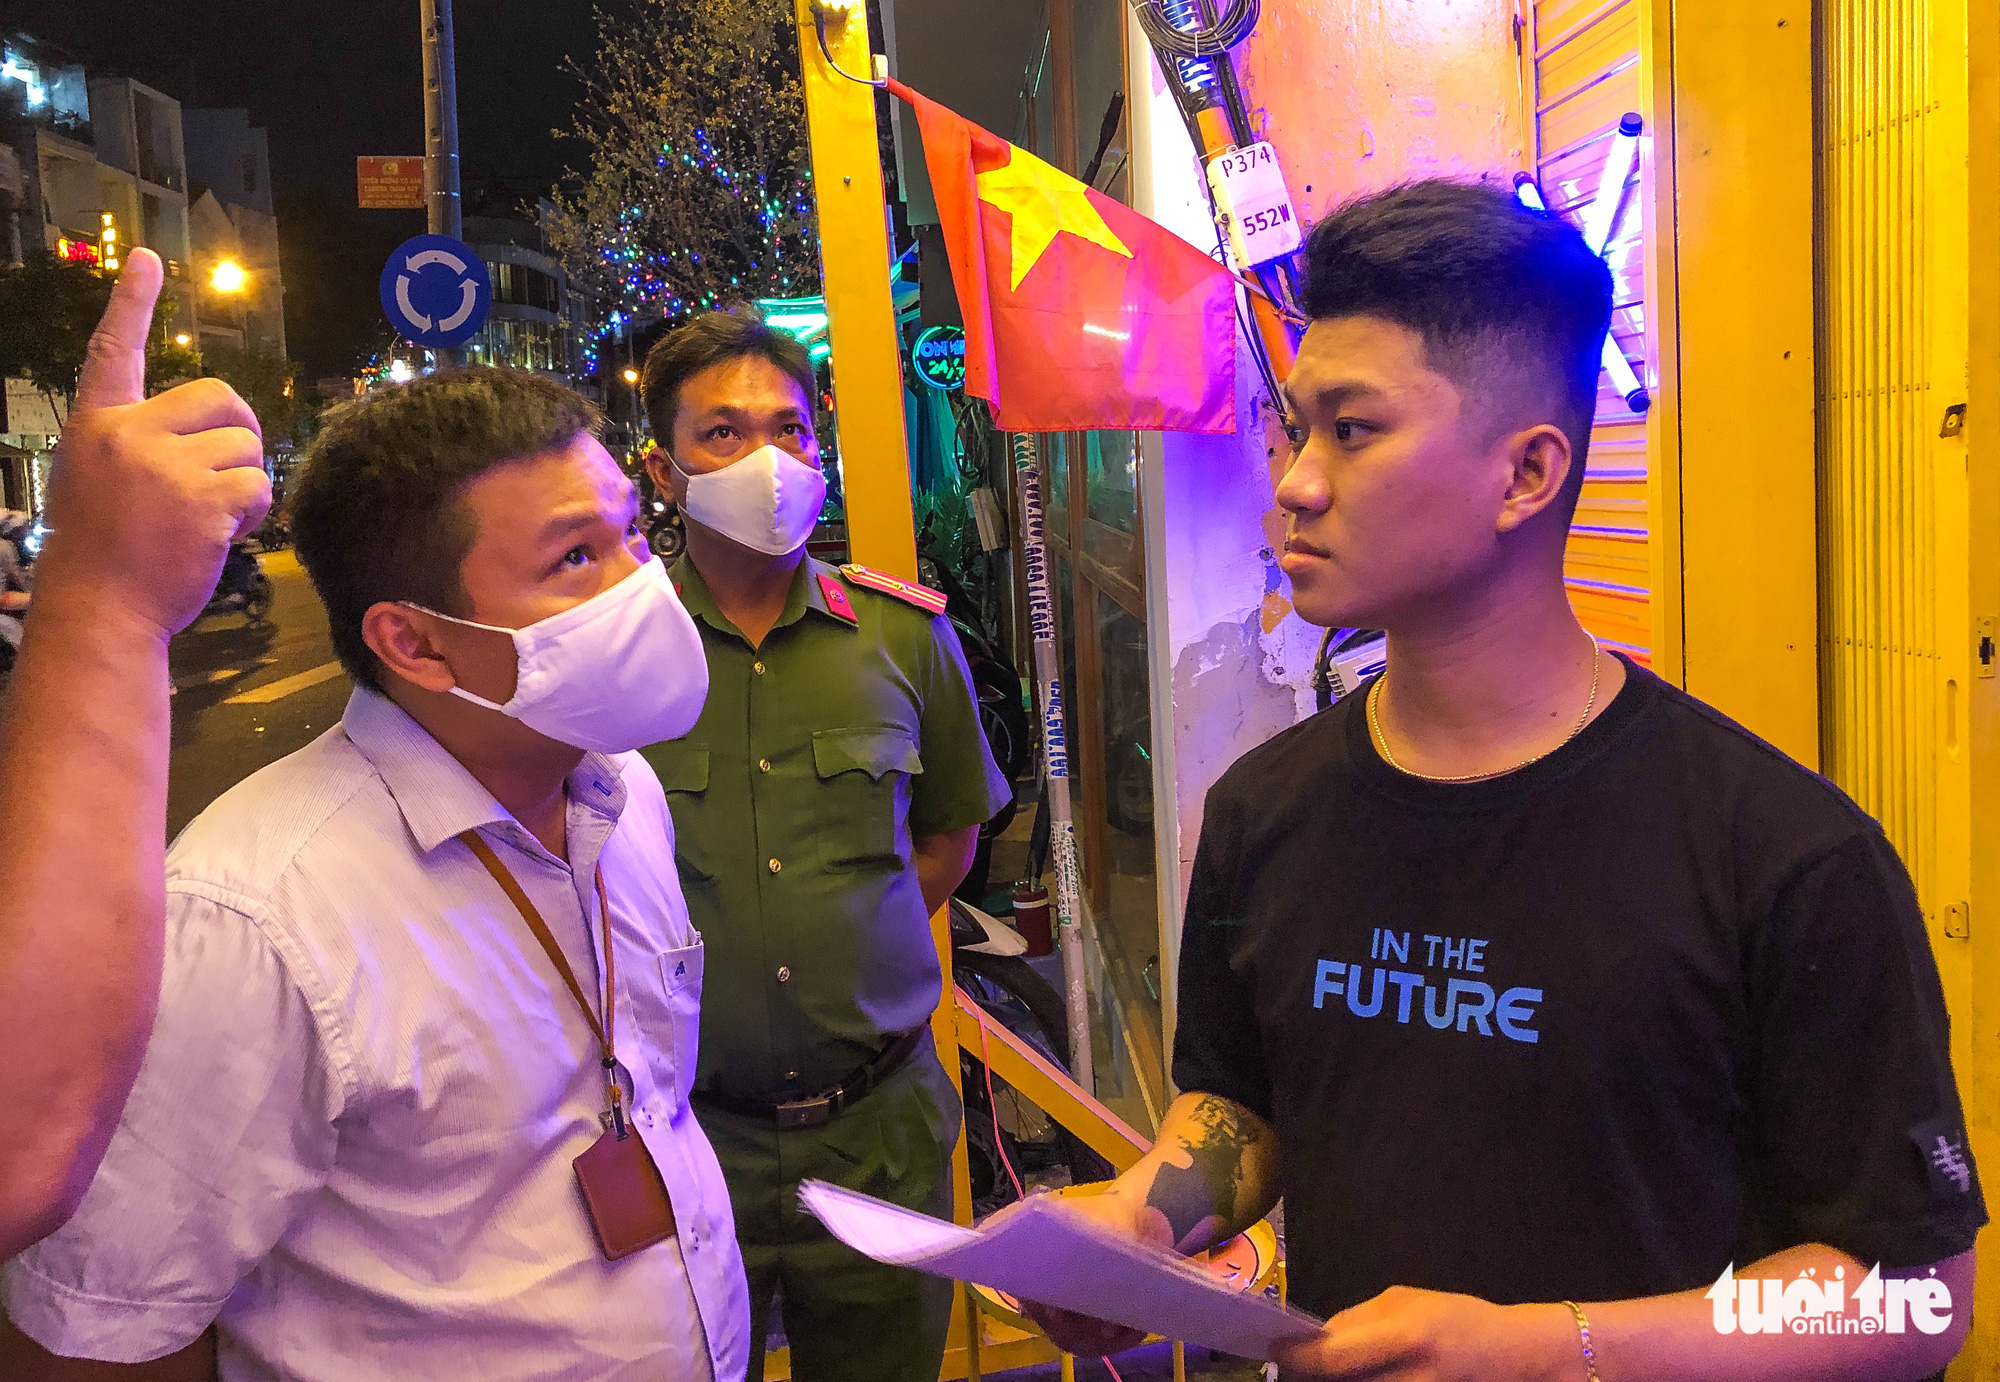 Stores on Bui Vien Street in Saigon committed to reducing noise